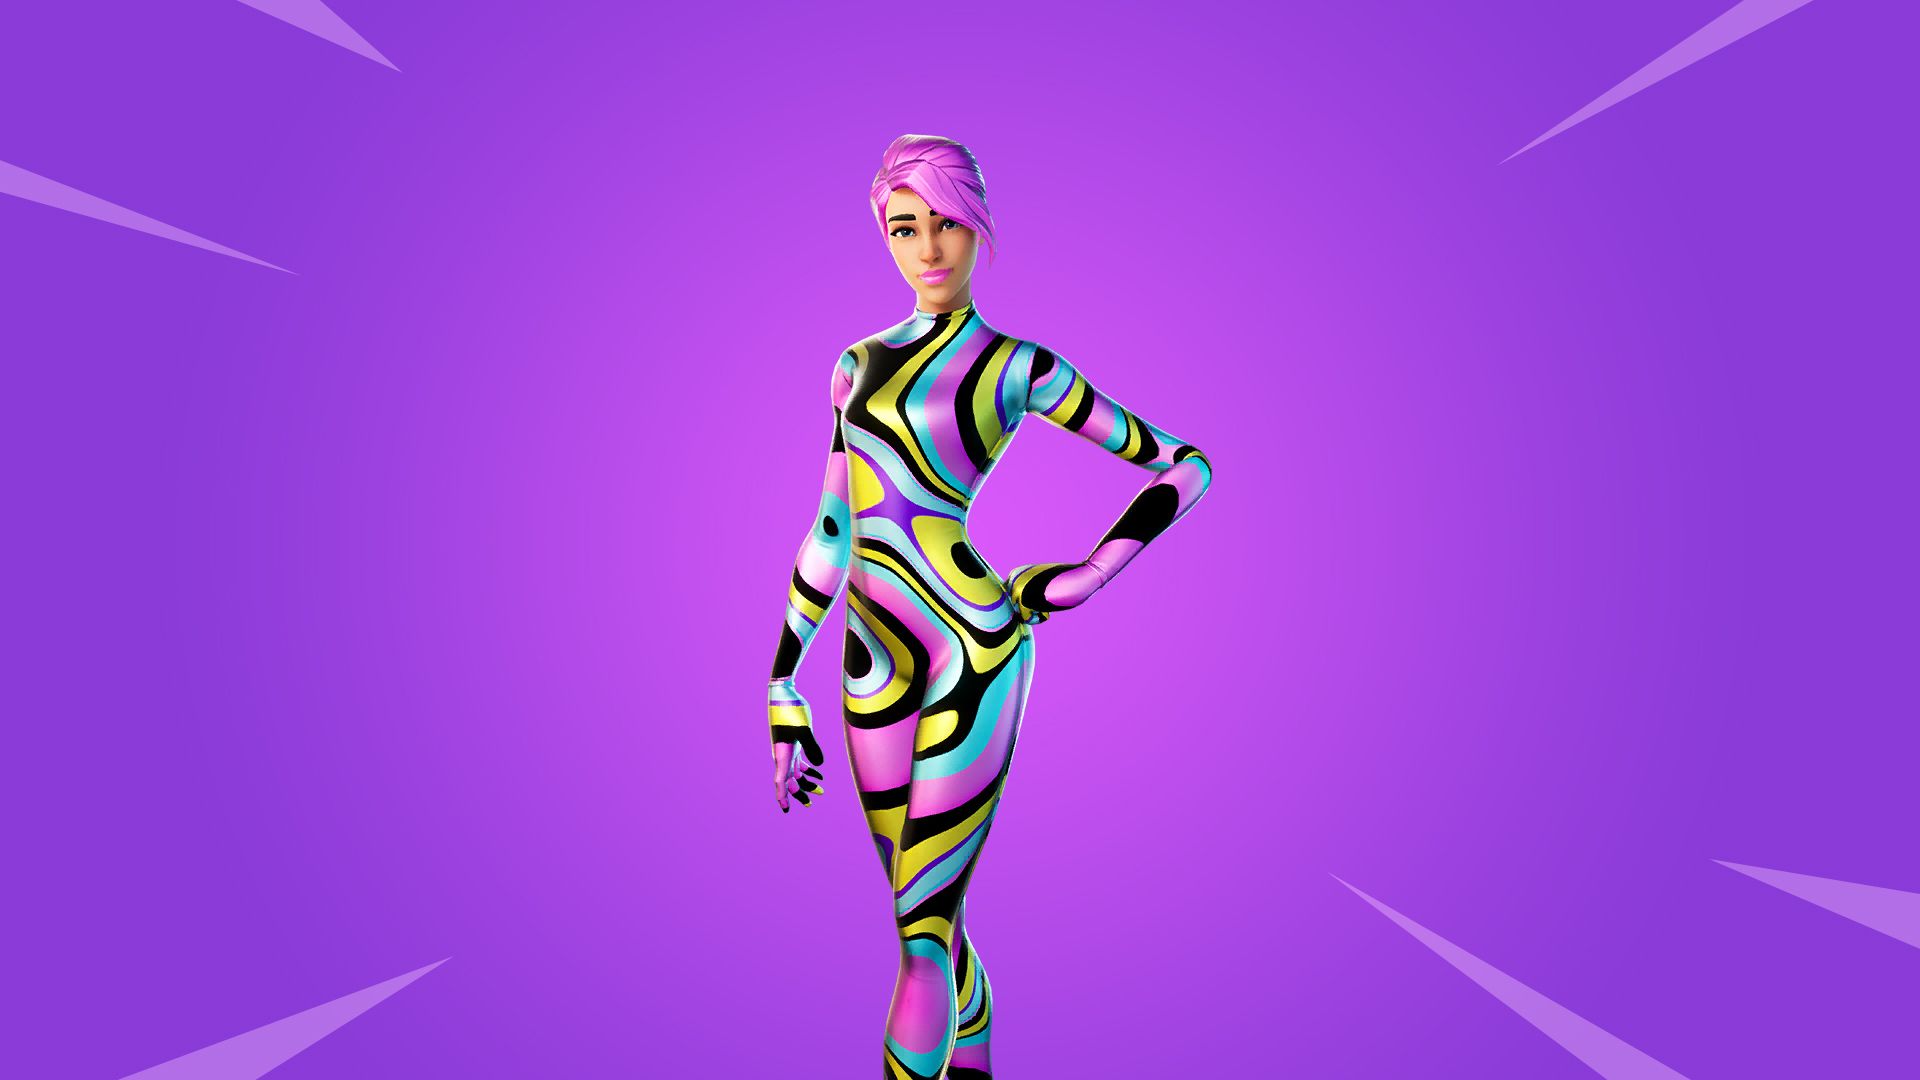 Fortnite Patch v12.50 - All Leaked Cosmetics (Skins, Emotes, Gliders, Wraps)